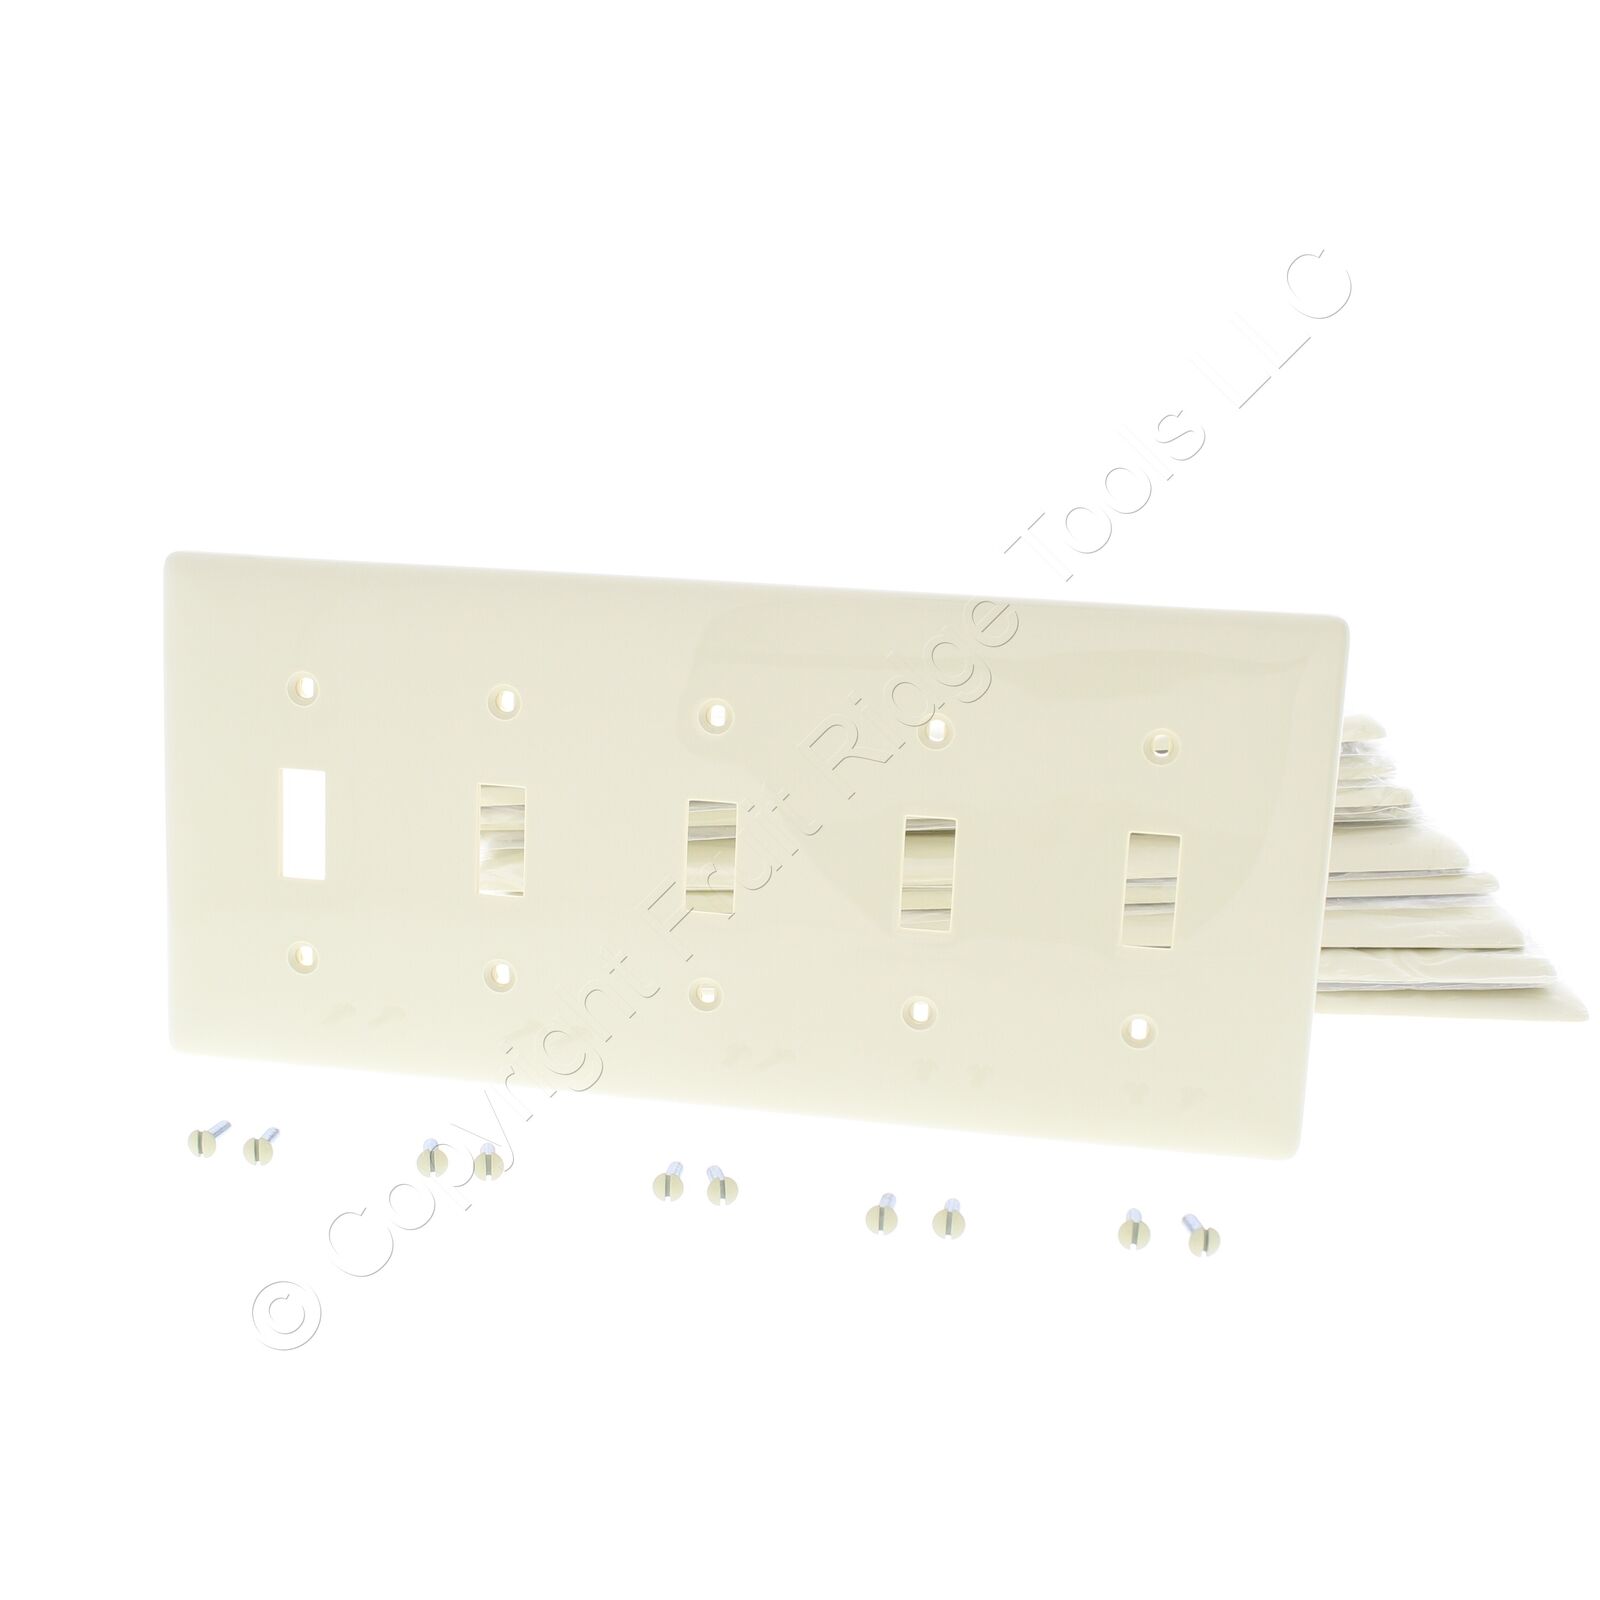 10 Hubbell Ivory UNBREAKABLE 5-Gang Switch Covers Wallplate Switchplate NP5I